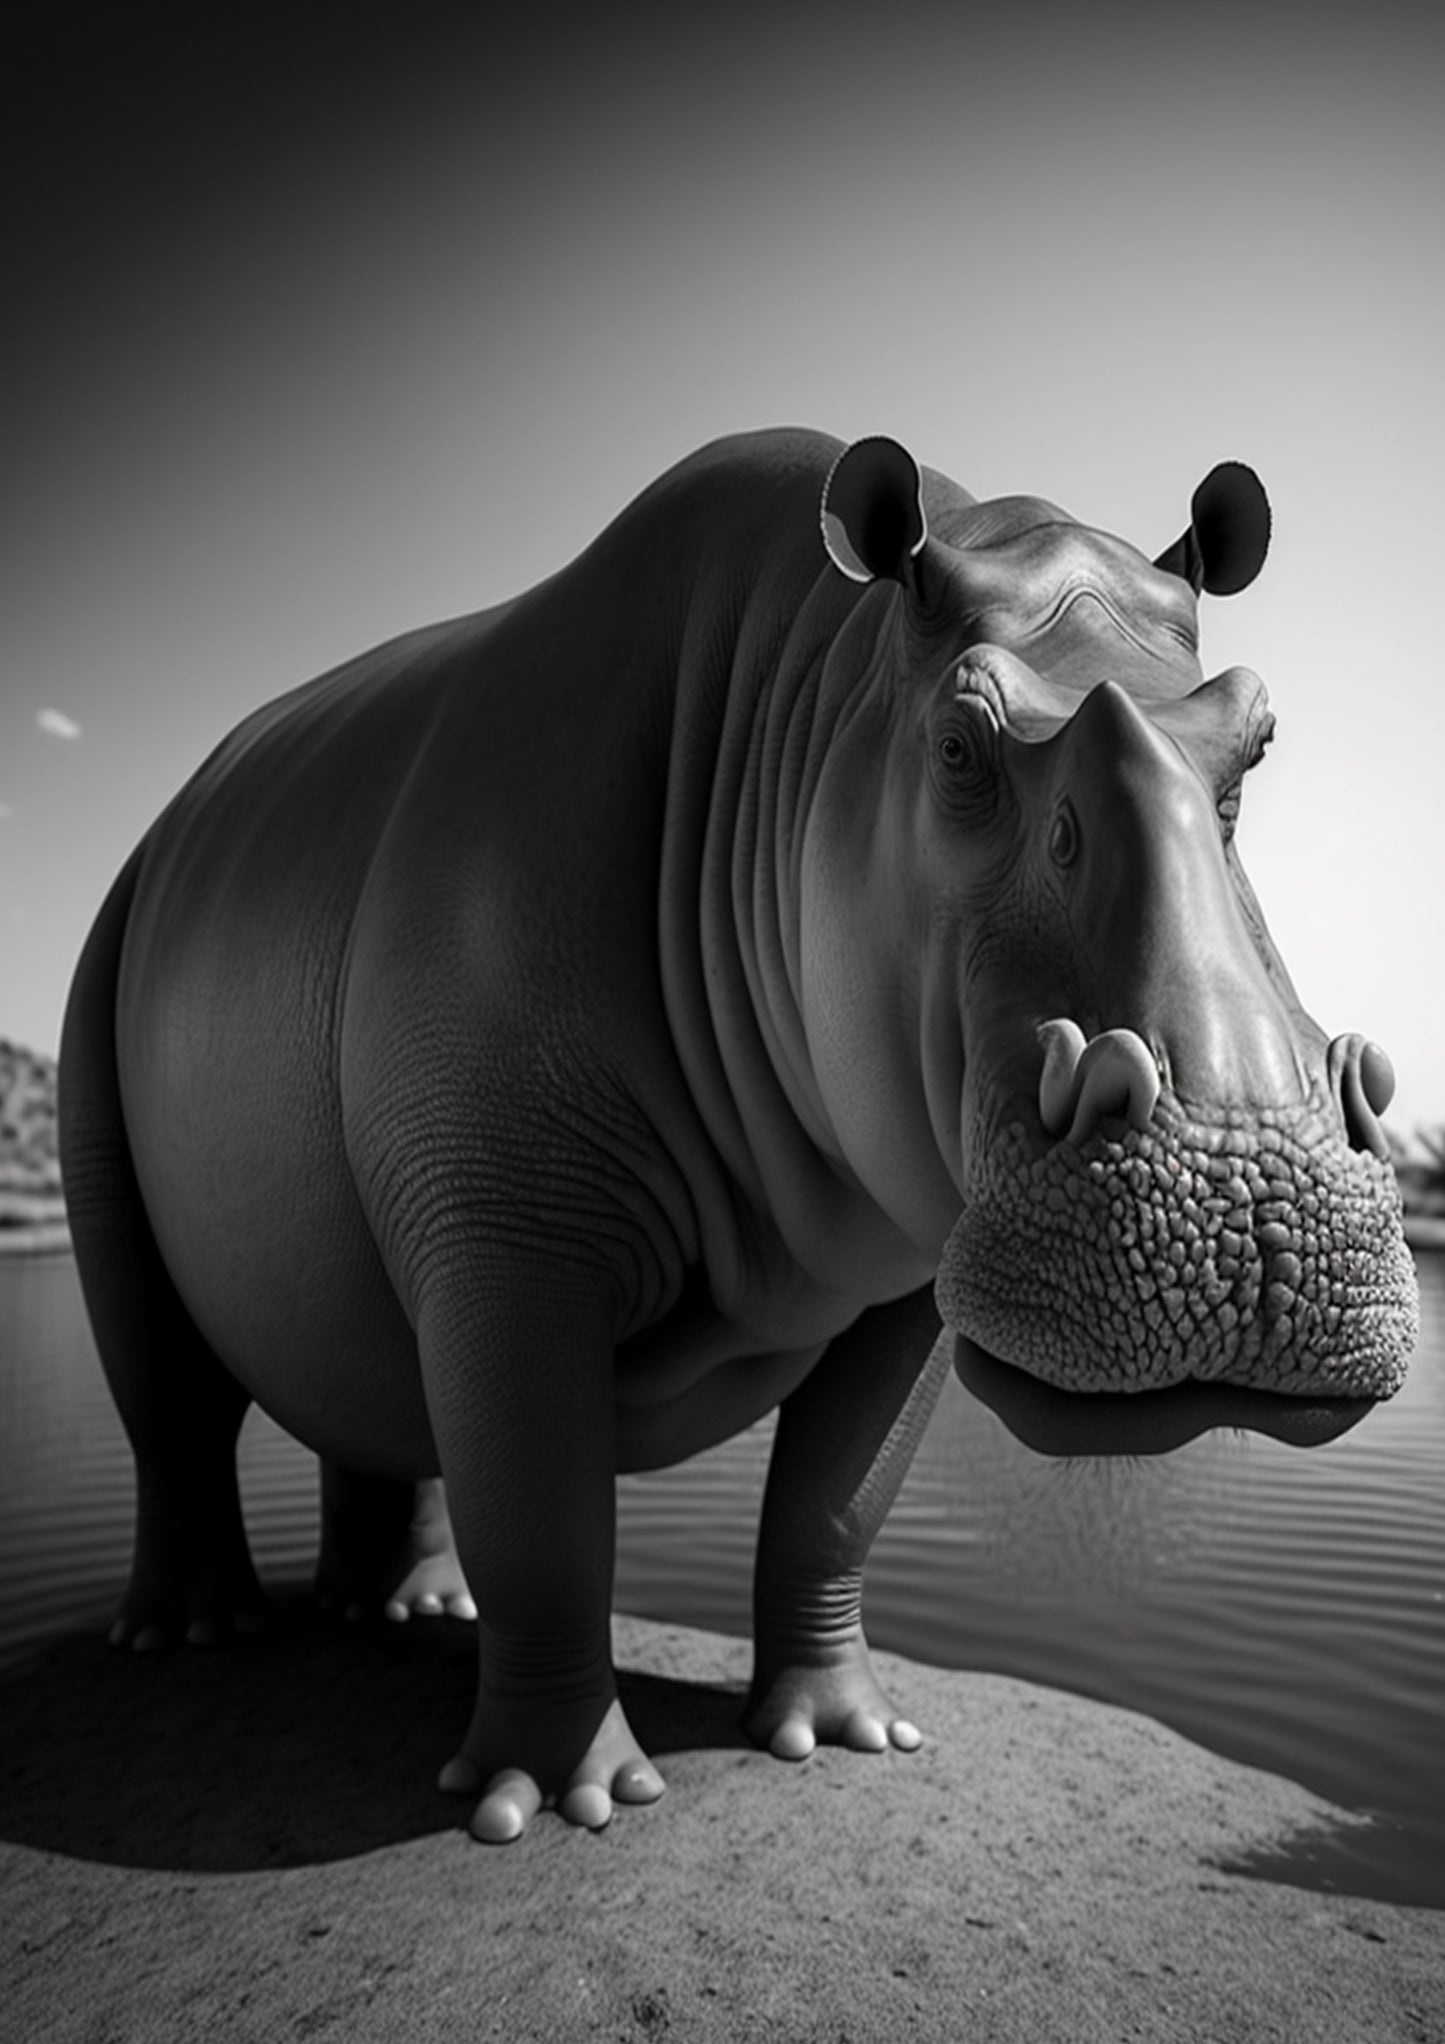 The monochrome wild animal’s collection - the Hippo